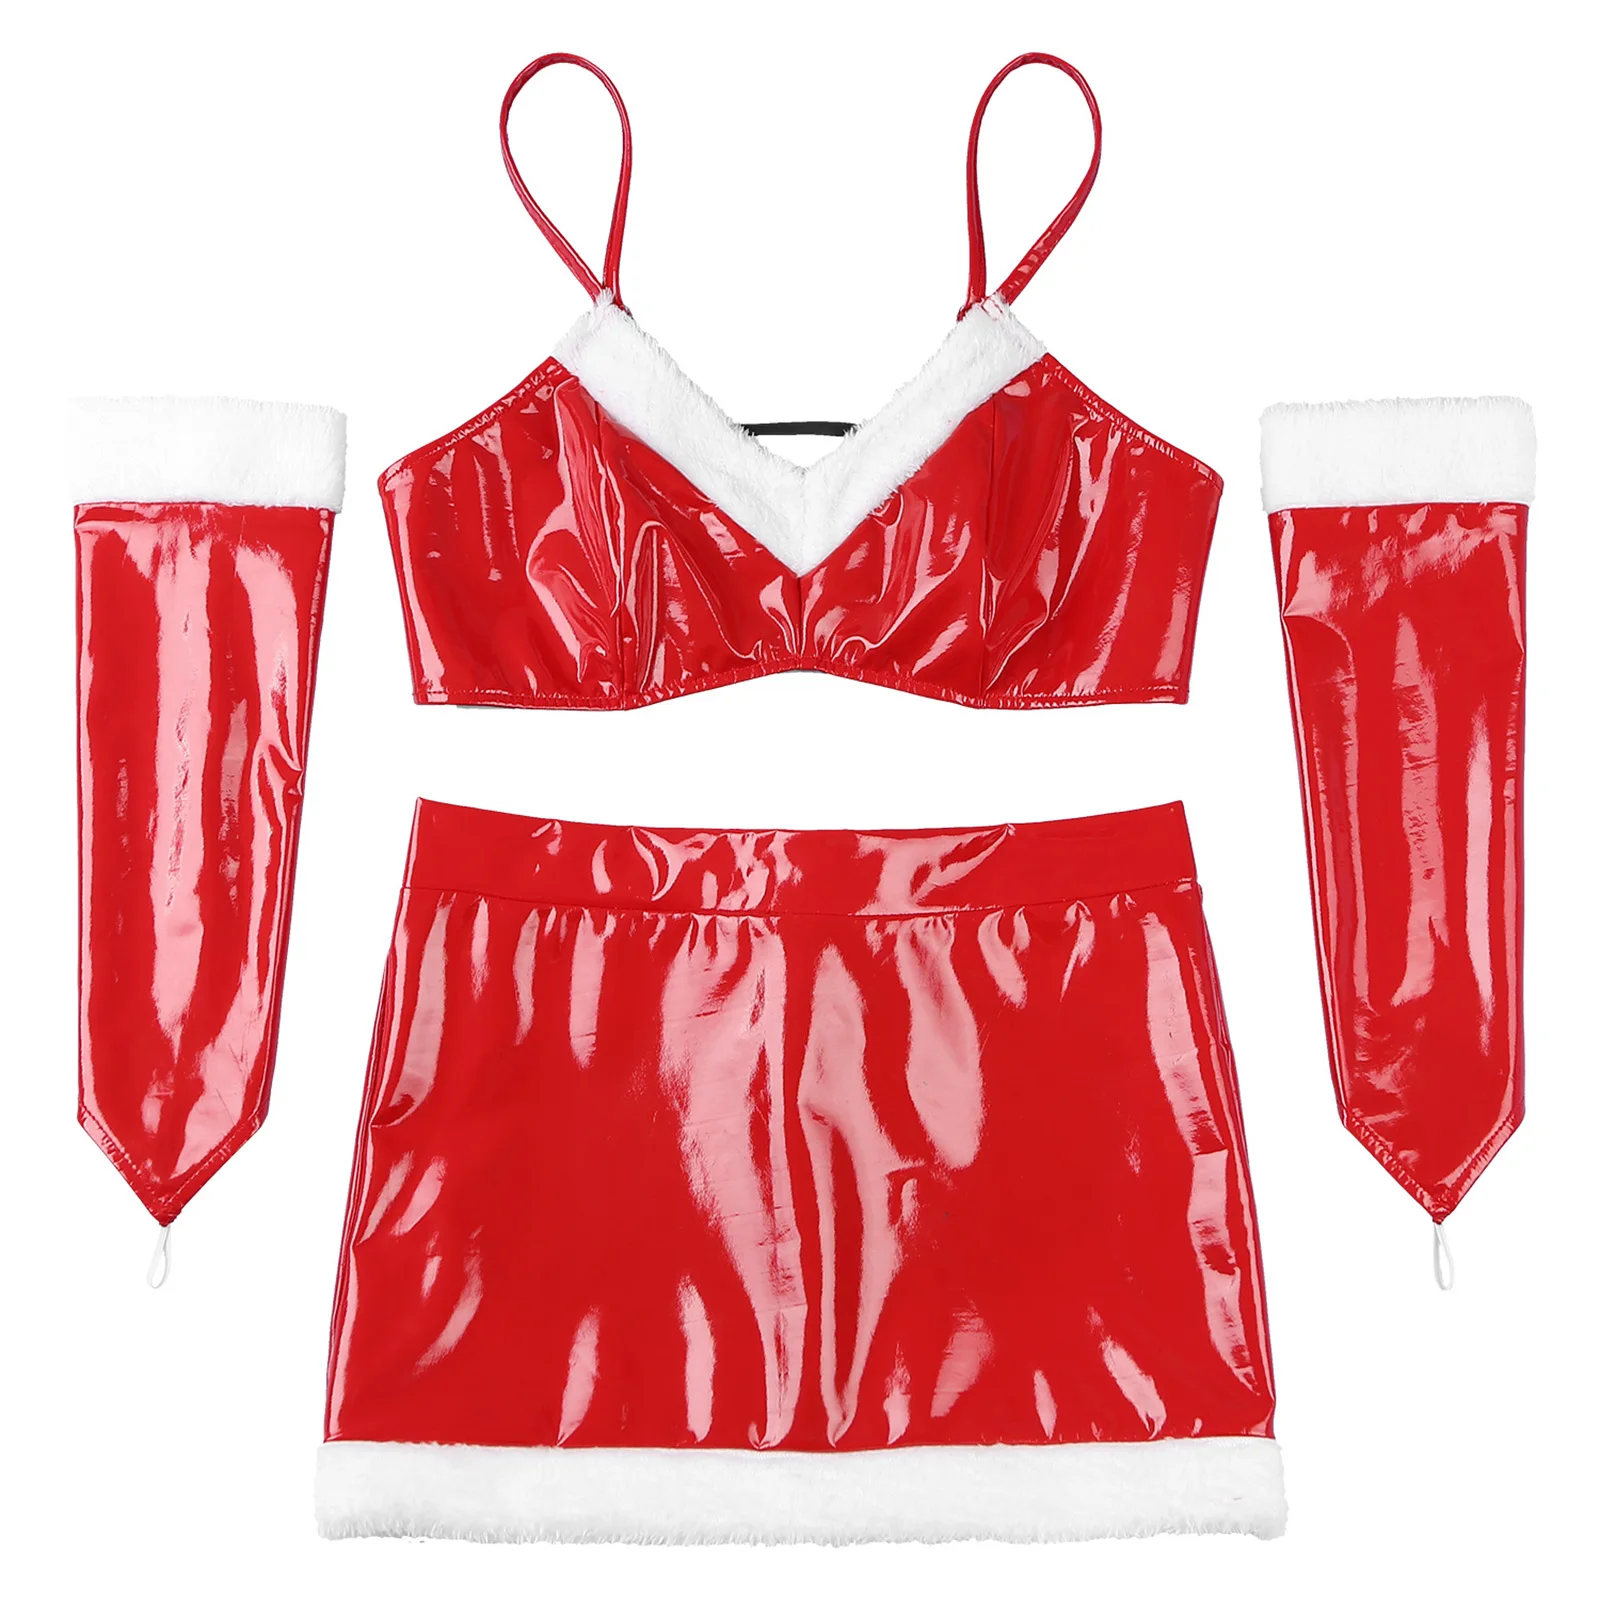 

Womens Red Glossy Santa Claus Dress Patent Leather Wet Look Christmas Sexy Cosplay Costume Crop Tops Open Butt Skirt And Glover